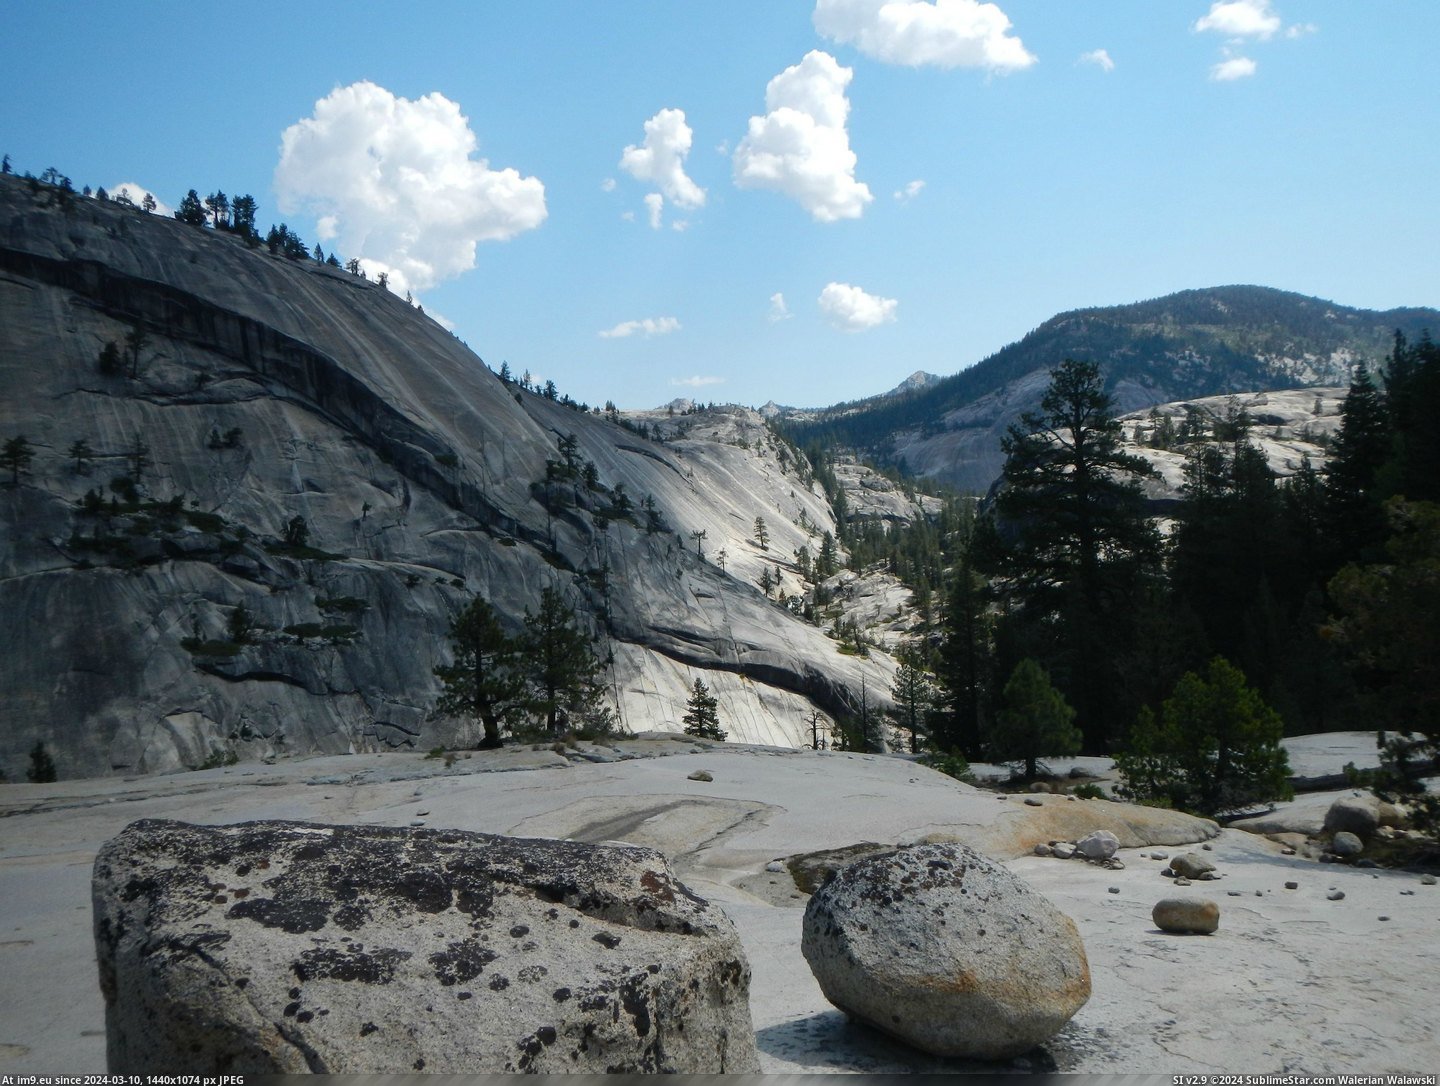 #One #Park #Out #Trip #Hundreds #Stood #Backpacking #National #Our #Yosemite [Earthporn] Out of hundreds of pictures on our backpacking trip this one stood out to me: Yosemite National Park. [OC] [4608x345 Pic. (Изображение из альбом My r/EARTHPORN favs))